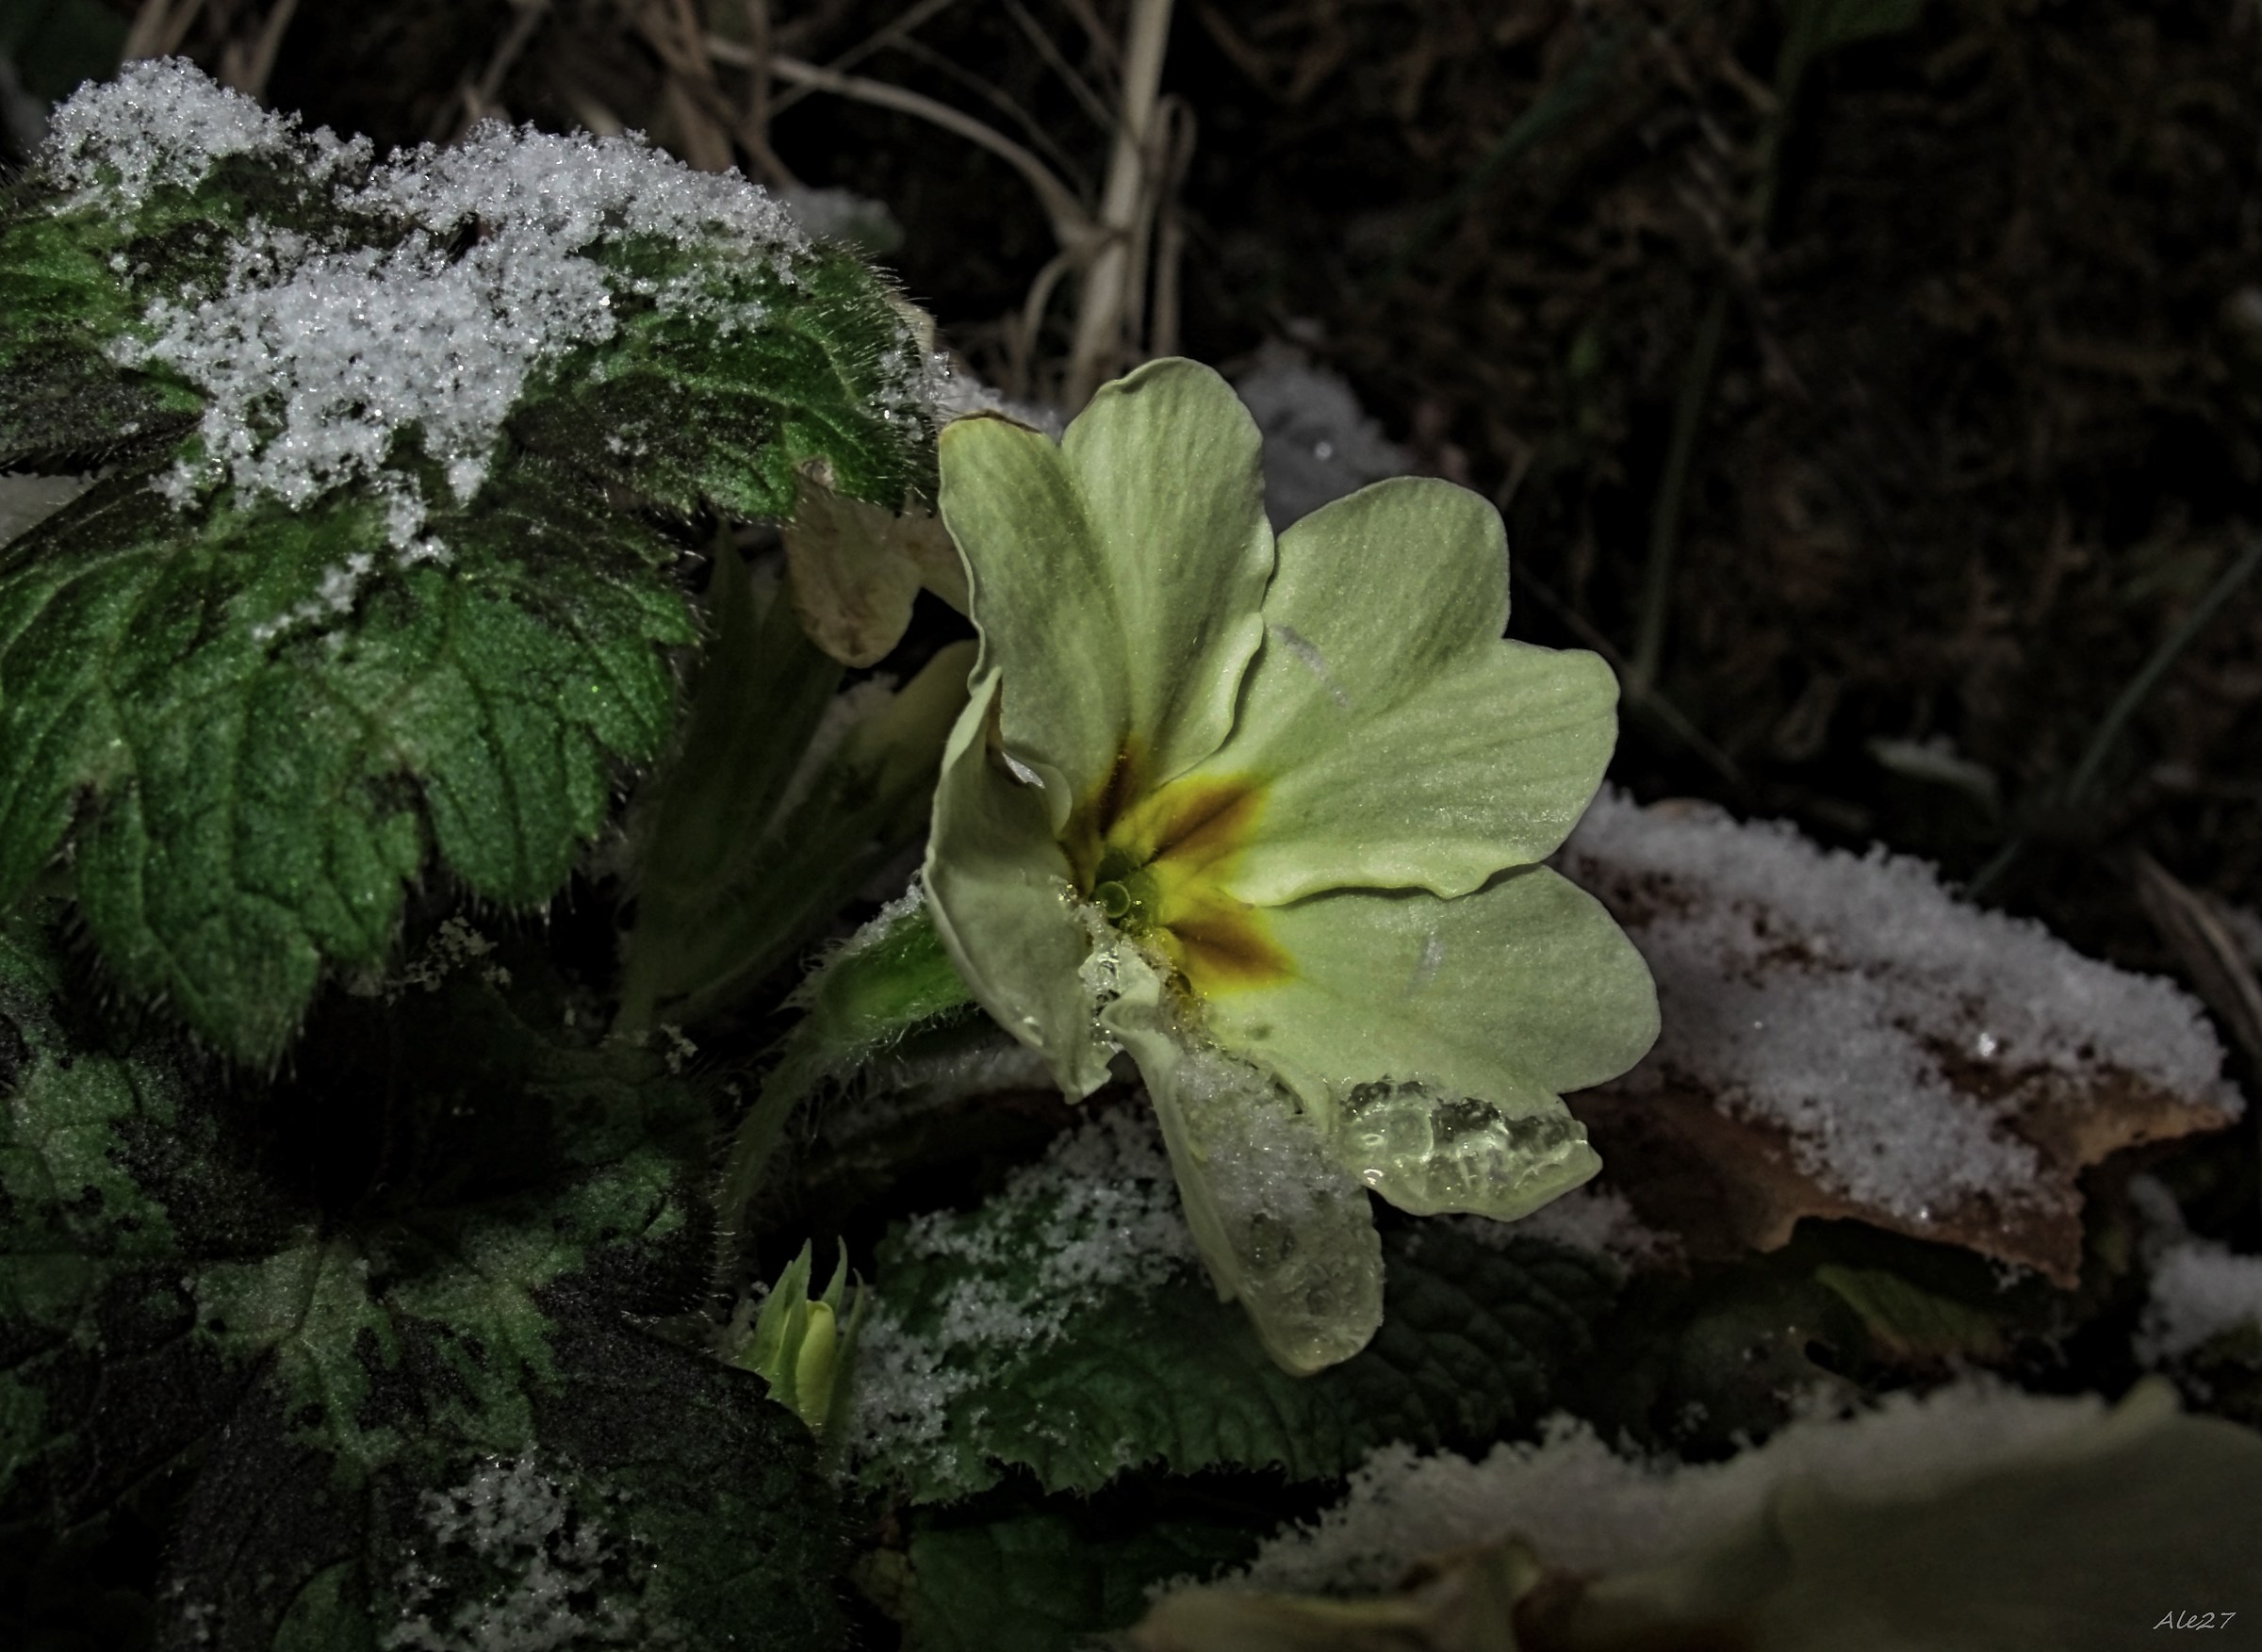 the meeting ... the primrose and the winter...